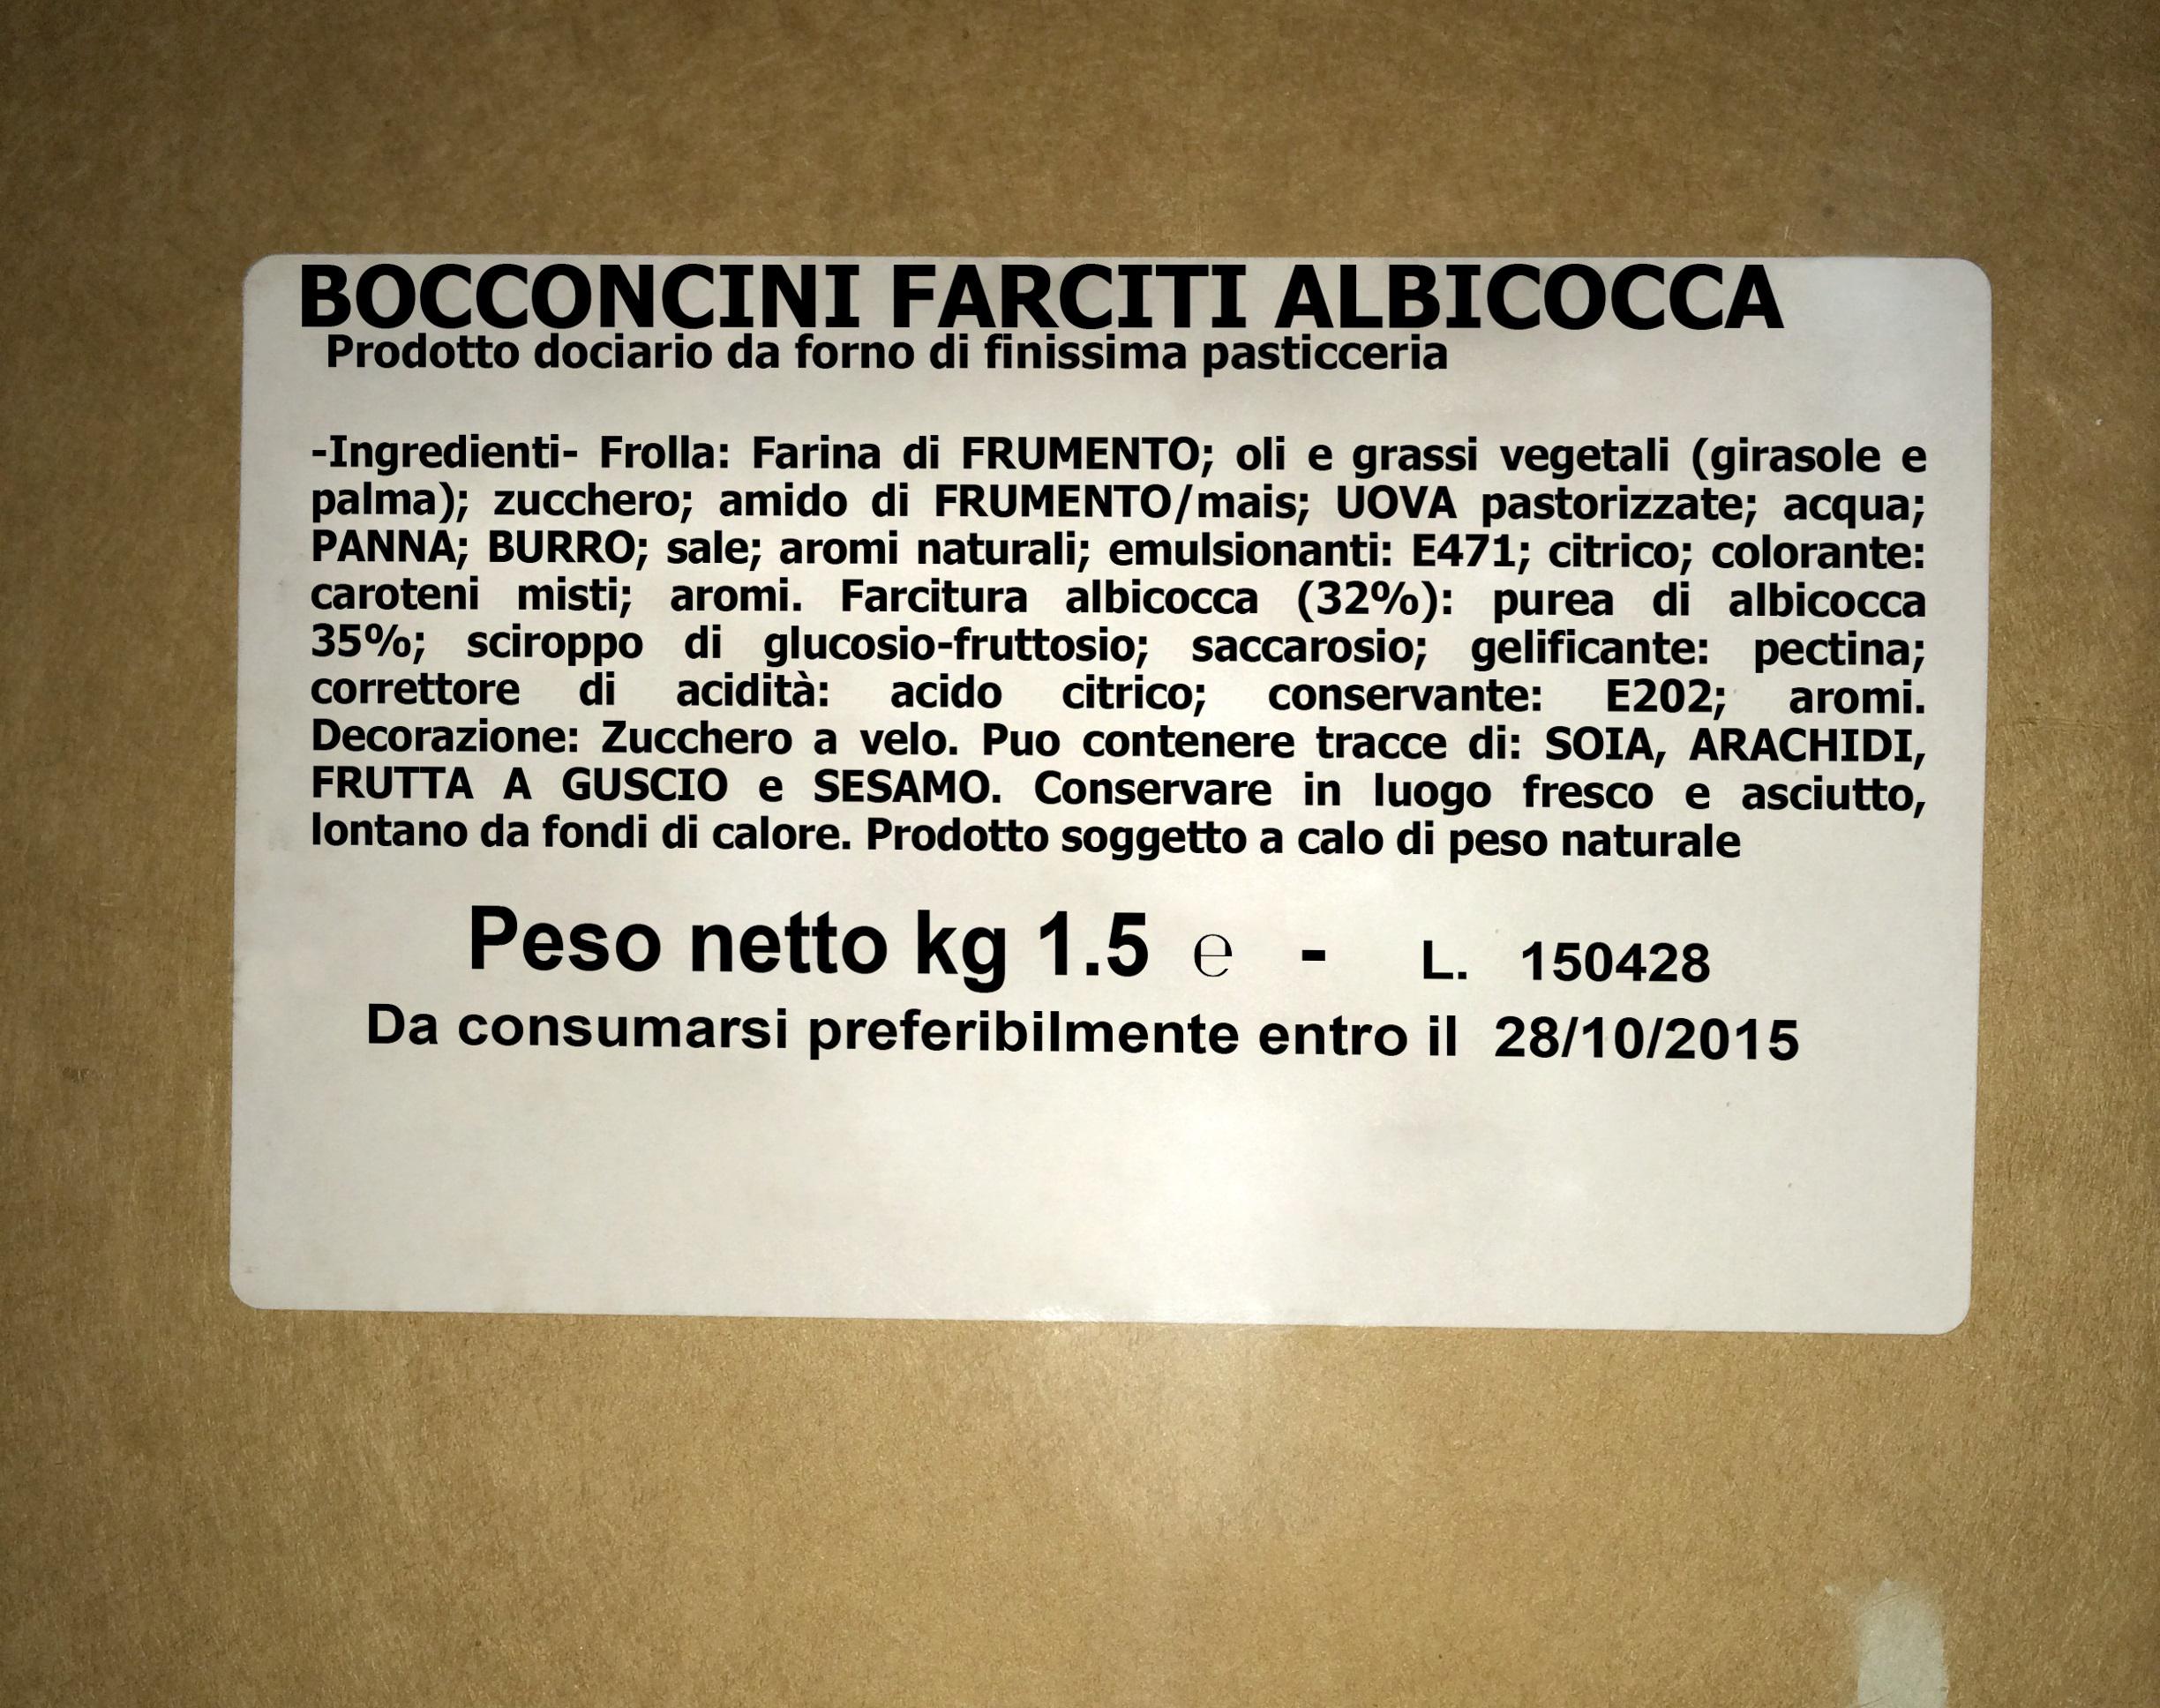 Label on the producer packaging